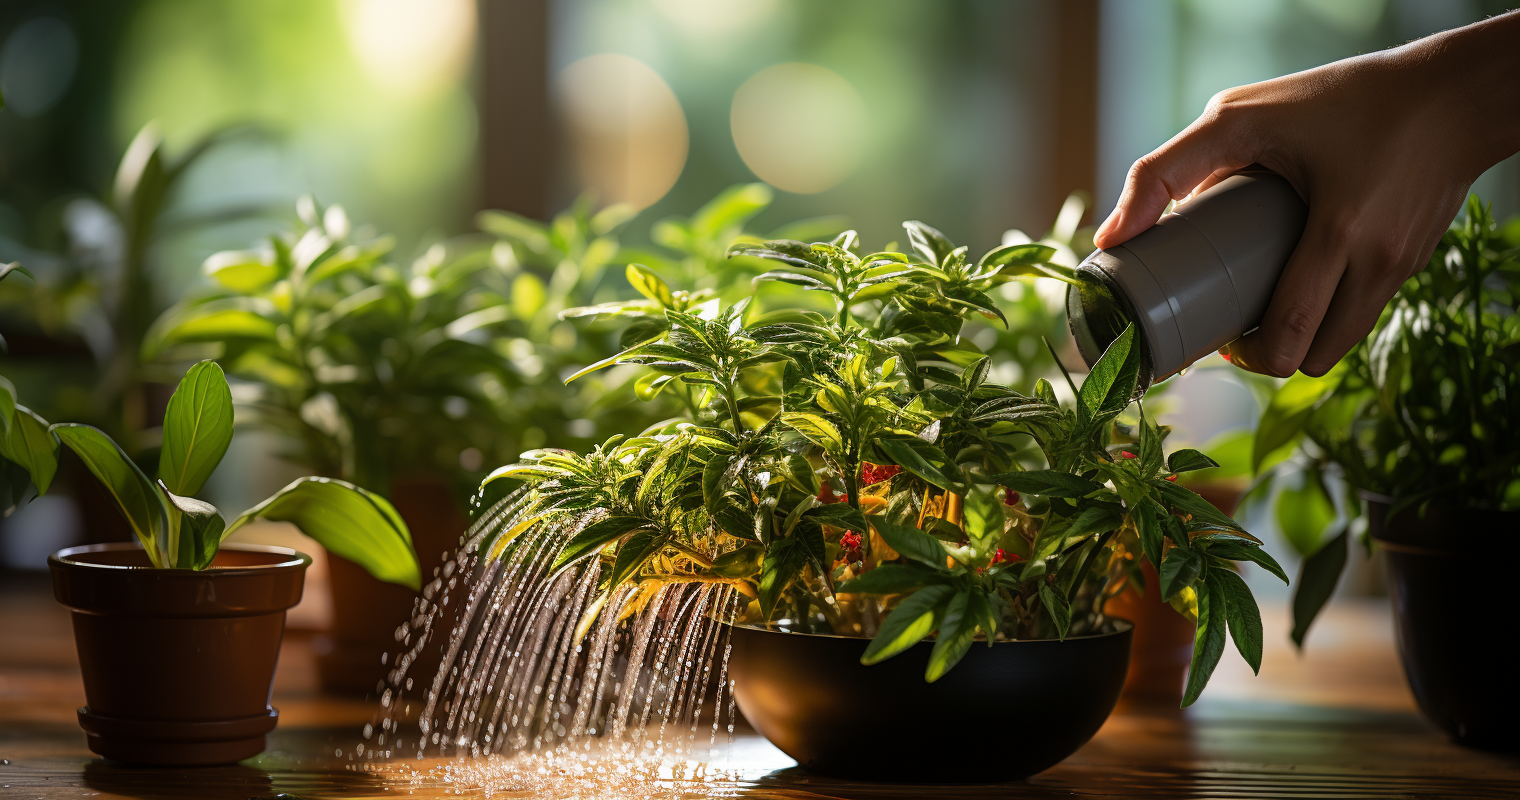  How Often To Water Houseplants In The Winter
